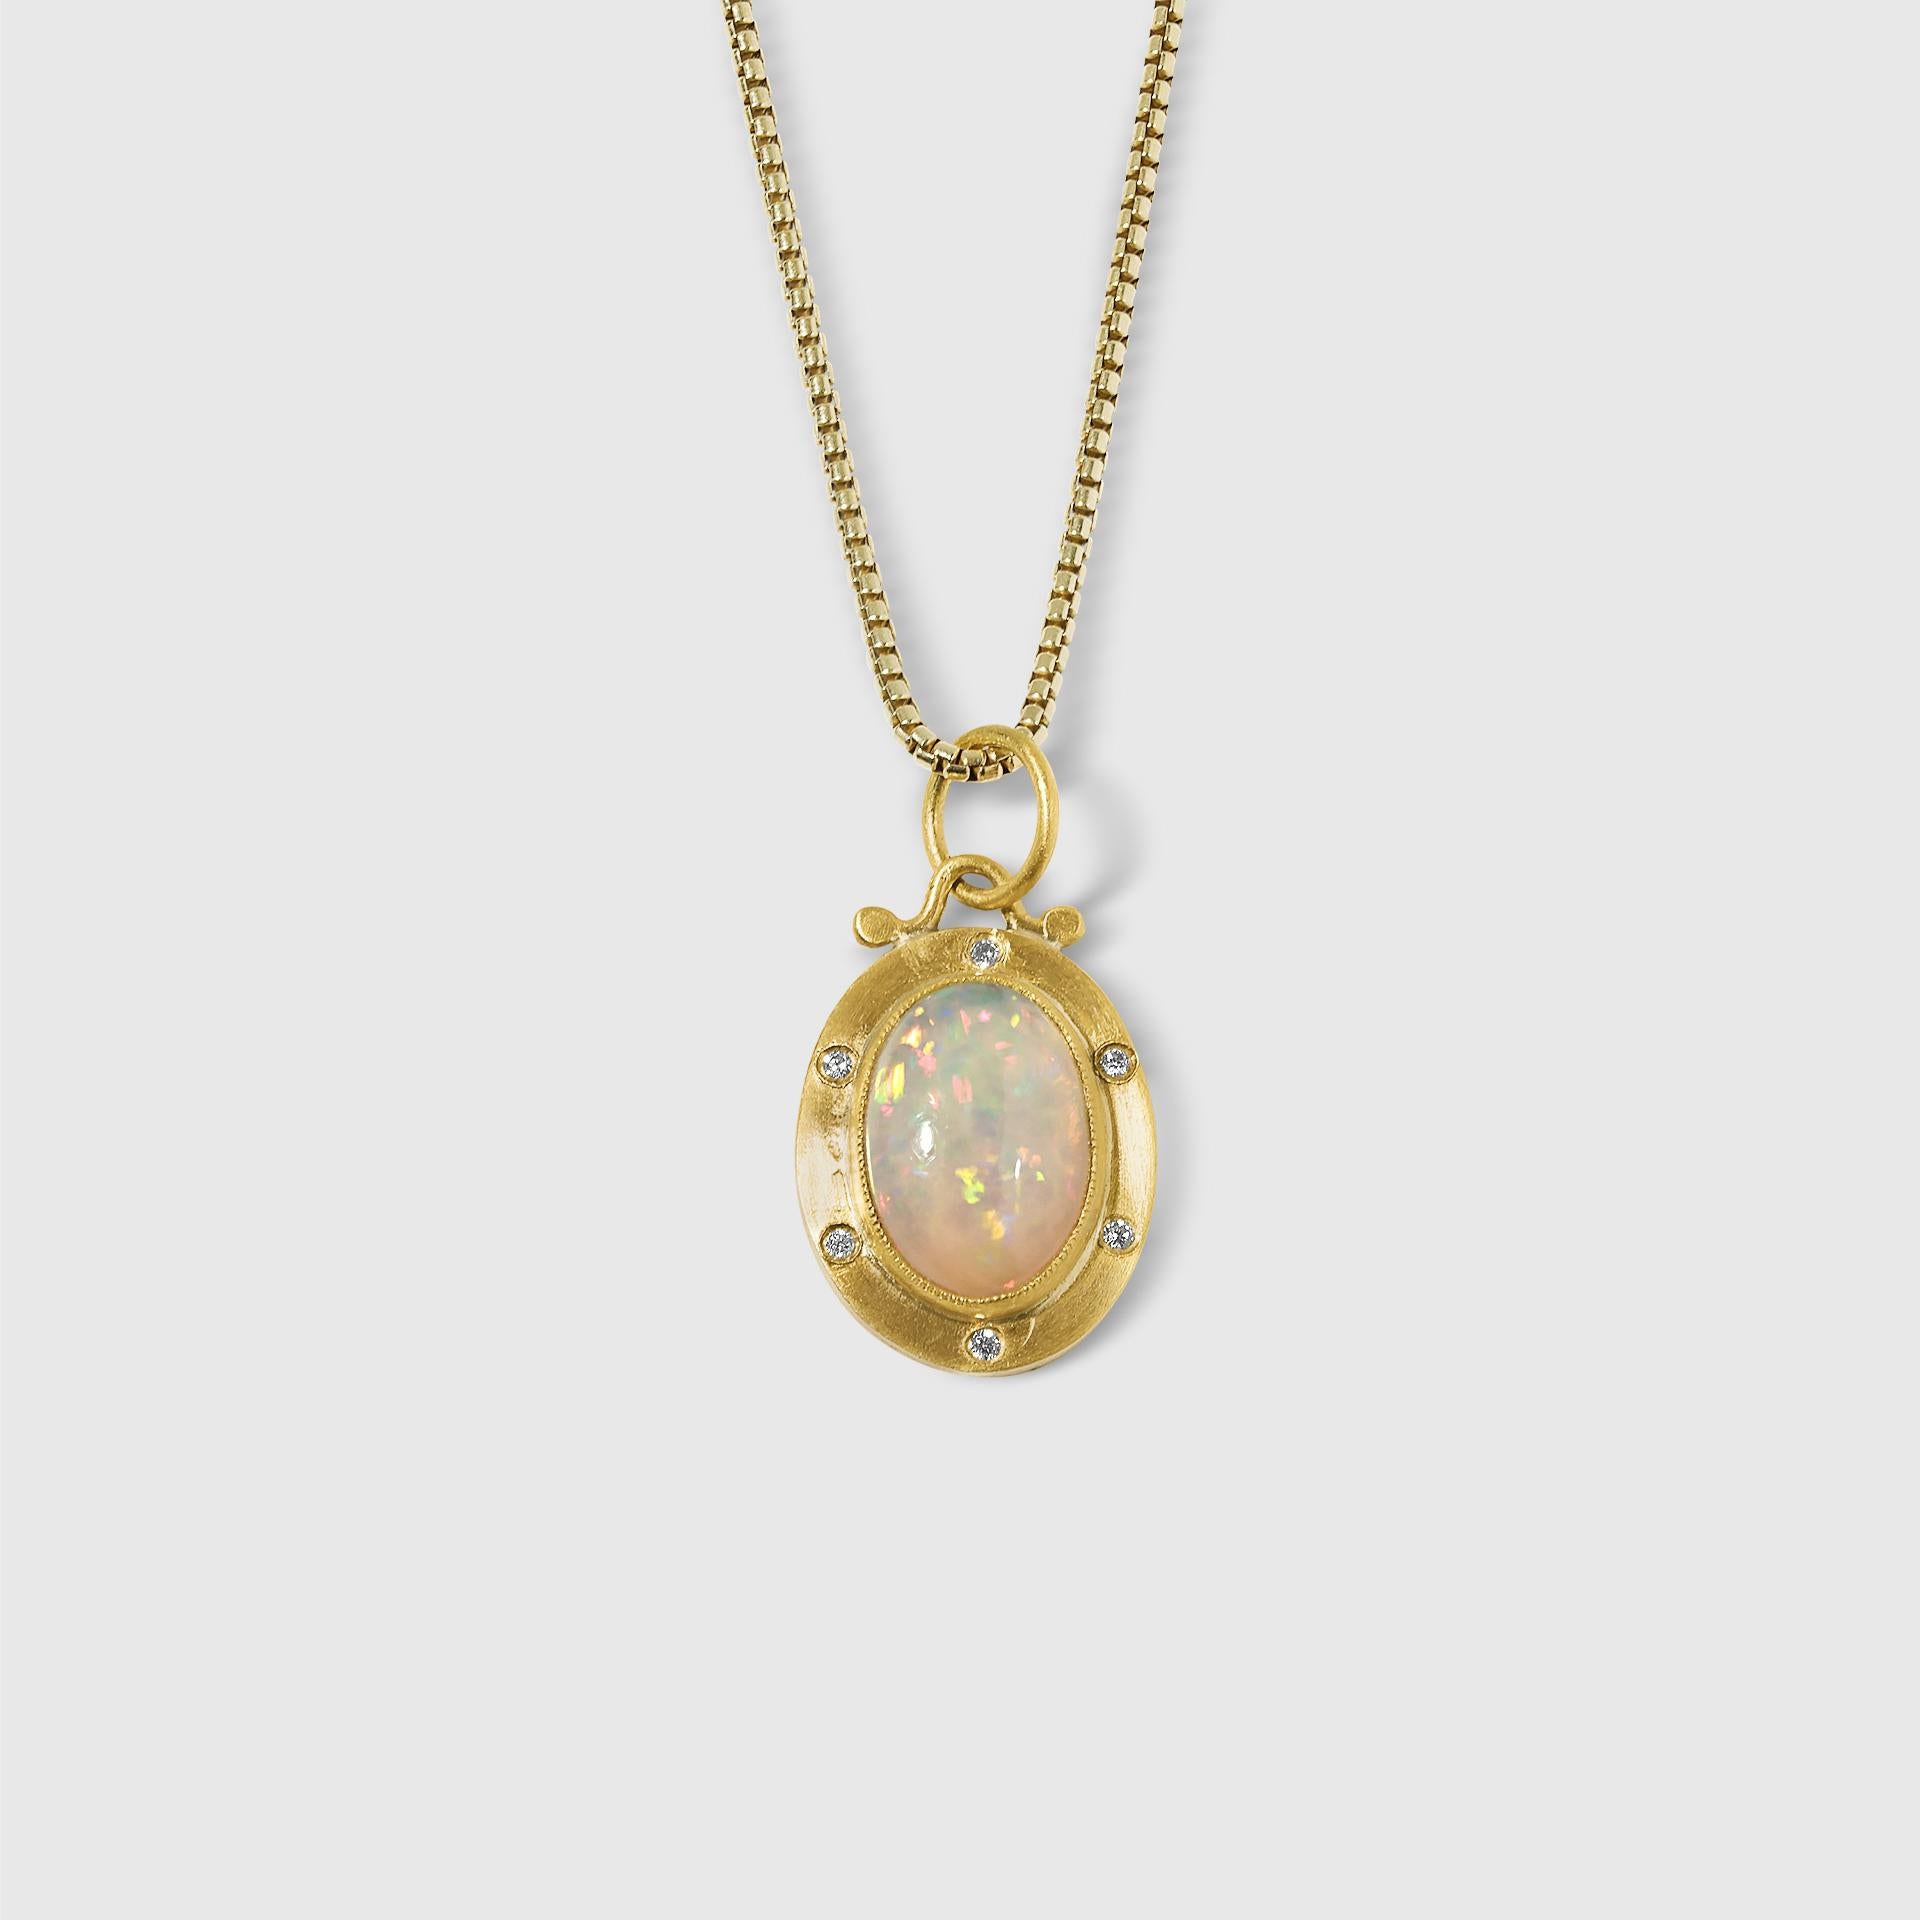 Contemporary 2.25 Ct Oval Opal Charm Pendant Necklace with Diamonds, 24kt Gold and Silver For Sale